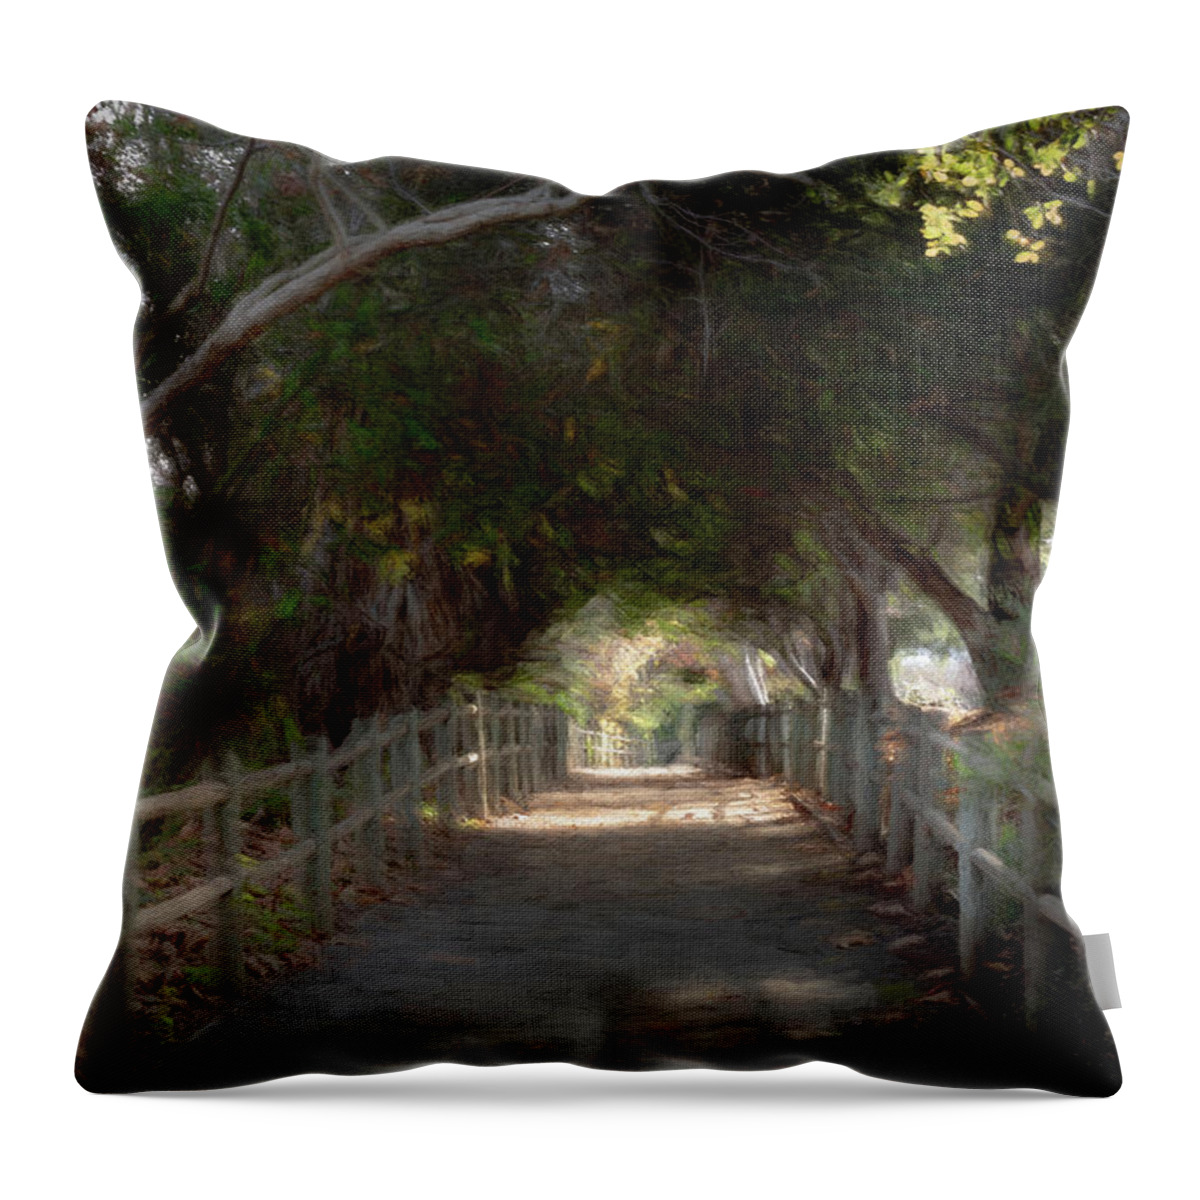 Trail Throw Pillow featuring the photograph Walking Trail by Alison Frank